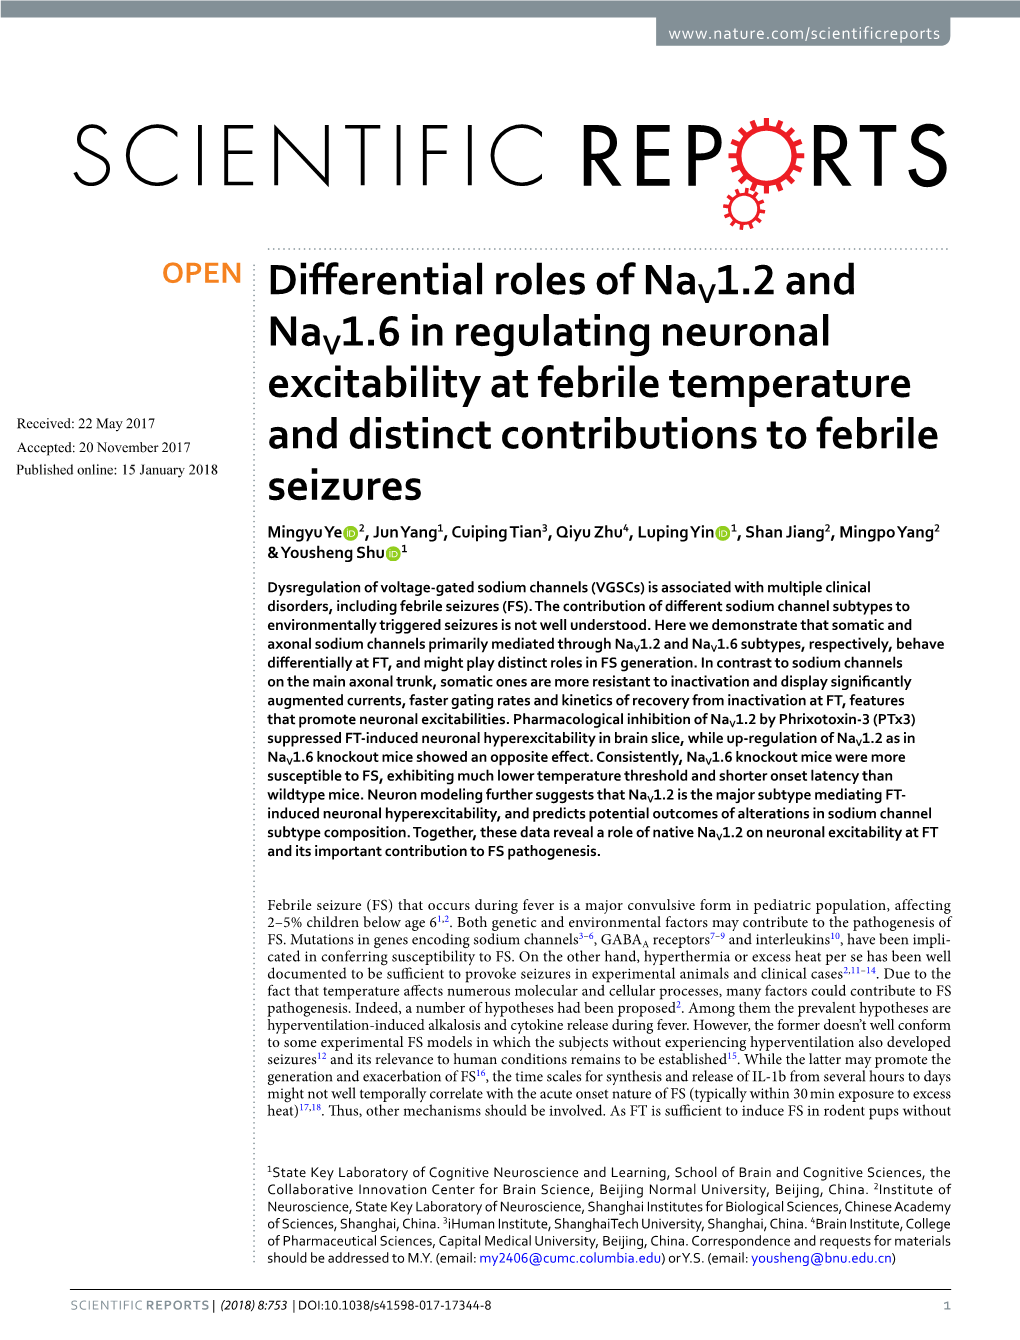 Differential Roles of Nav1.2 and Nav1.6 in Regulating Neuronal